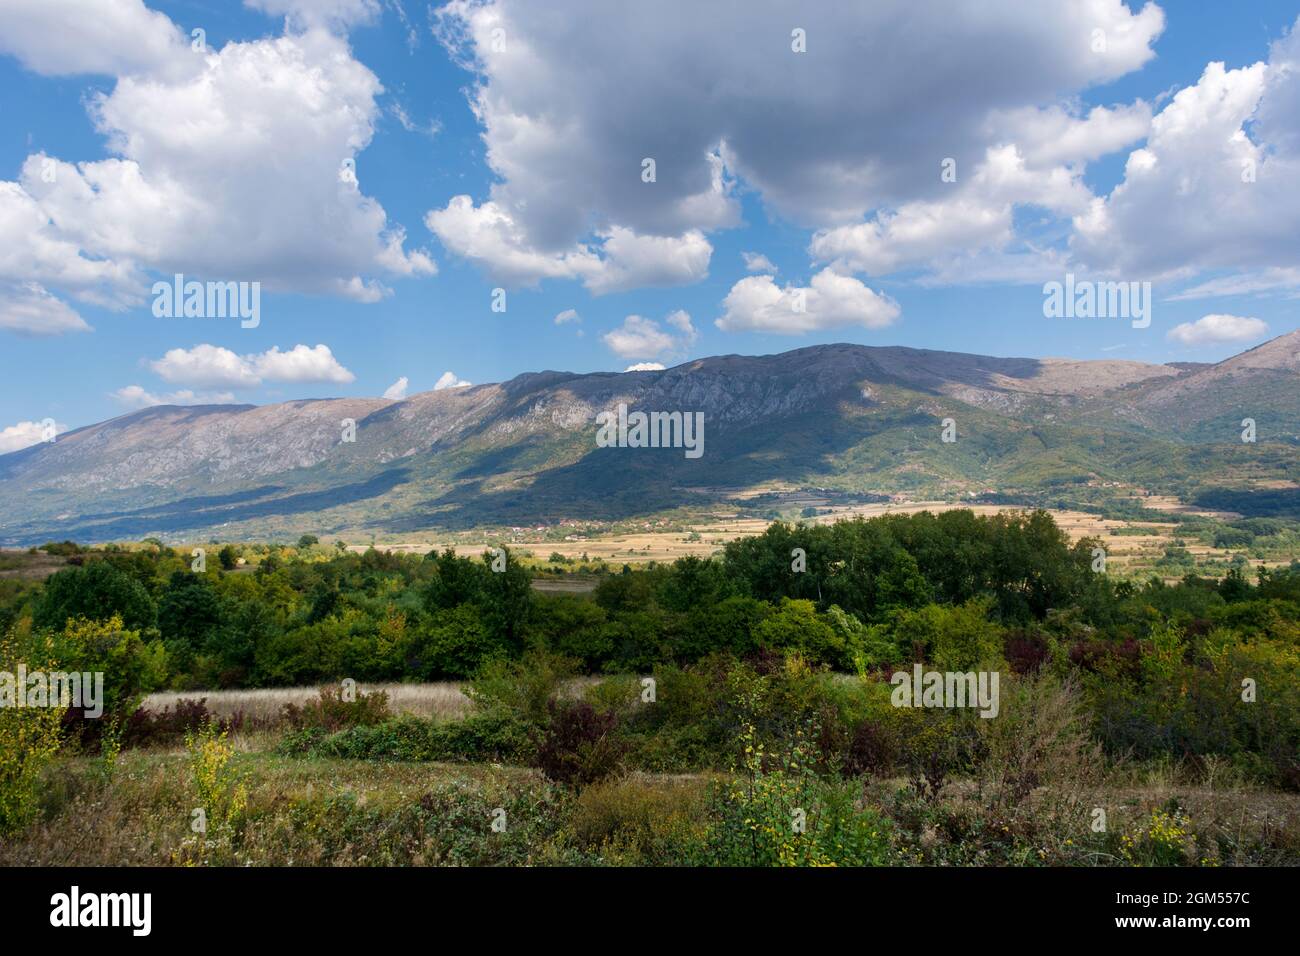 Beautiful landscape view of Suva Planina (The dry mountain) in Serbia on an autumn day. White clouds cast a shadow on the great mountain Stock Photo